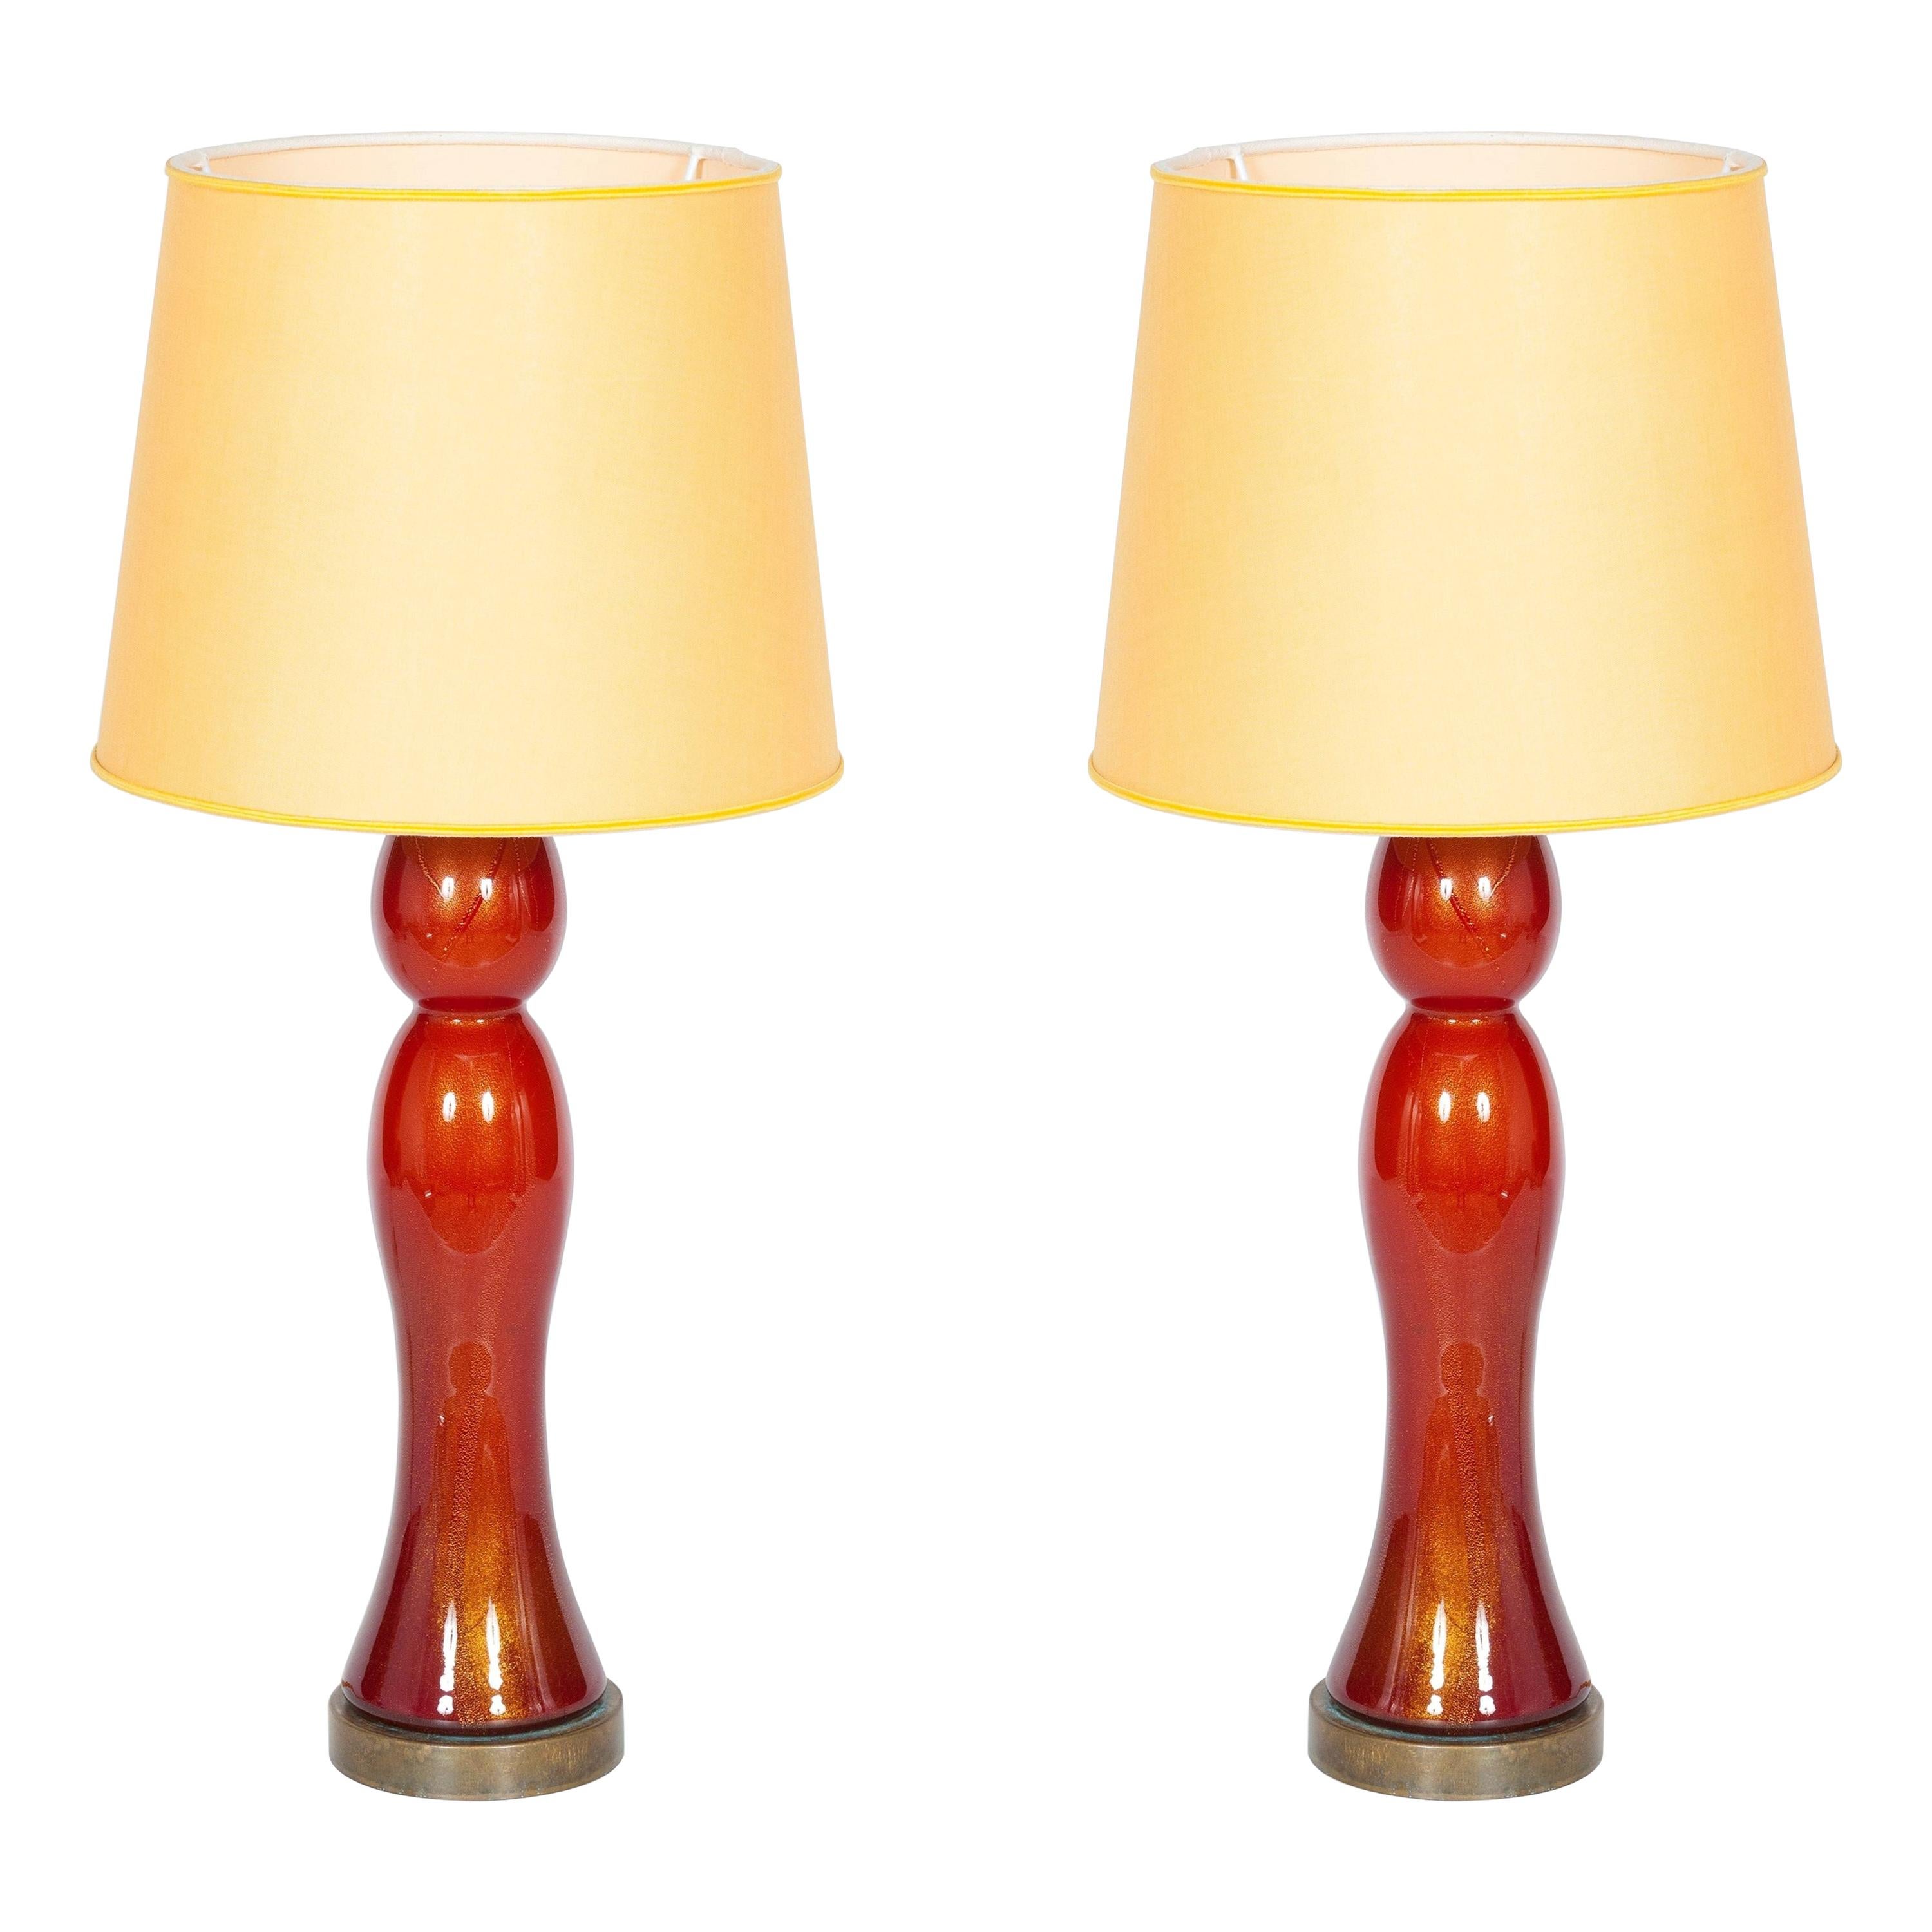 Pair of Murano Glass Table Lamps Coral and Gold Leaf Color, 1980s